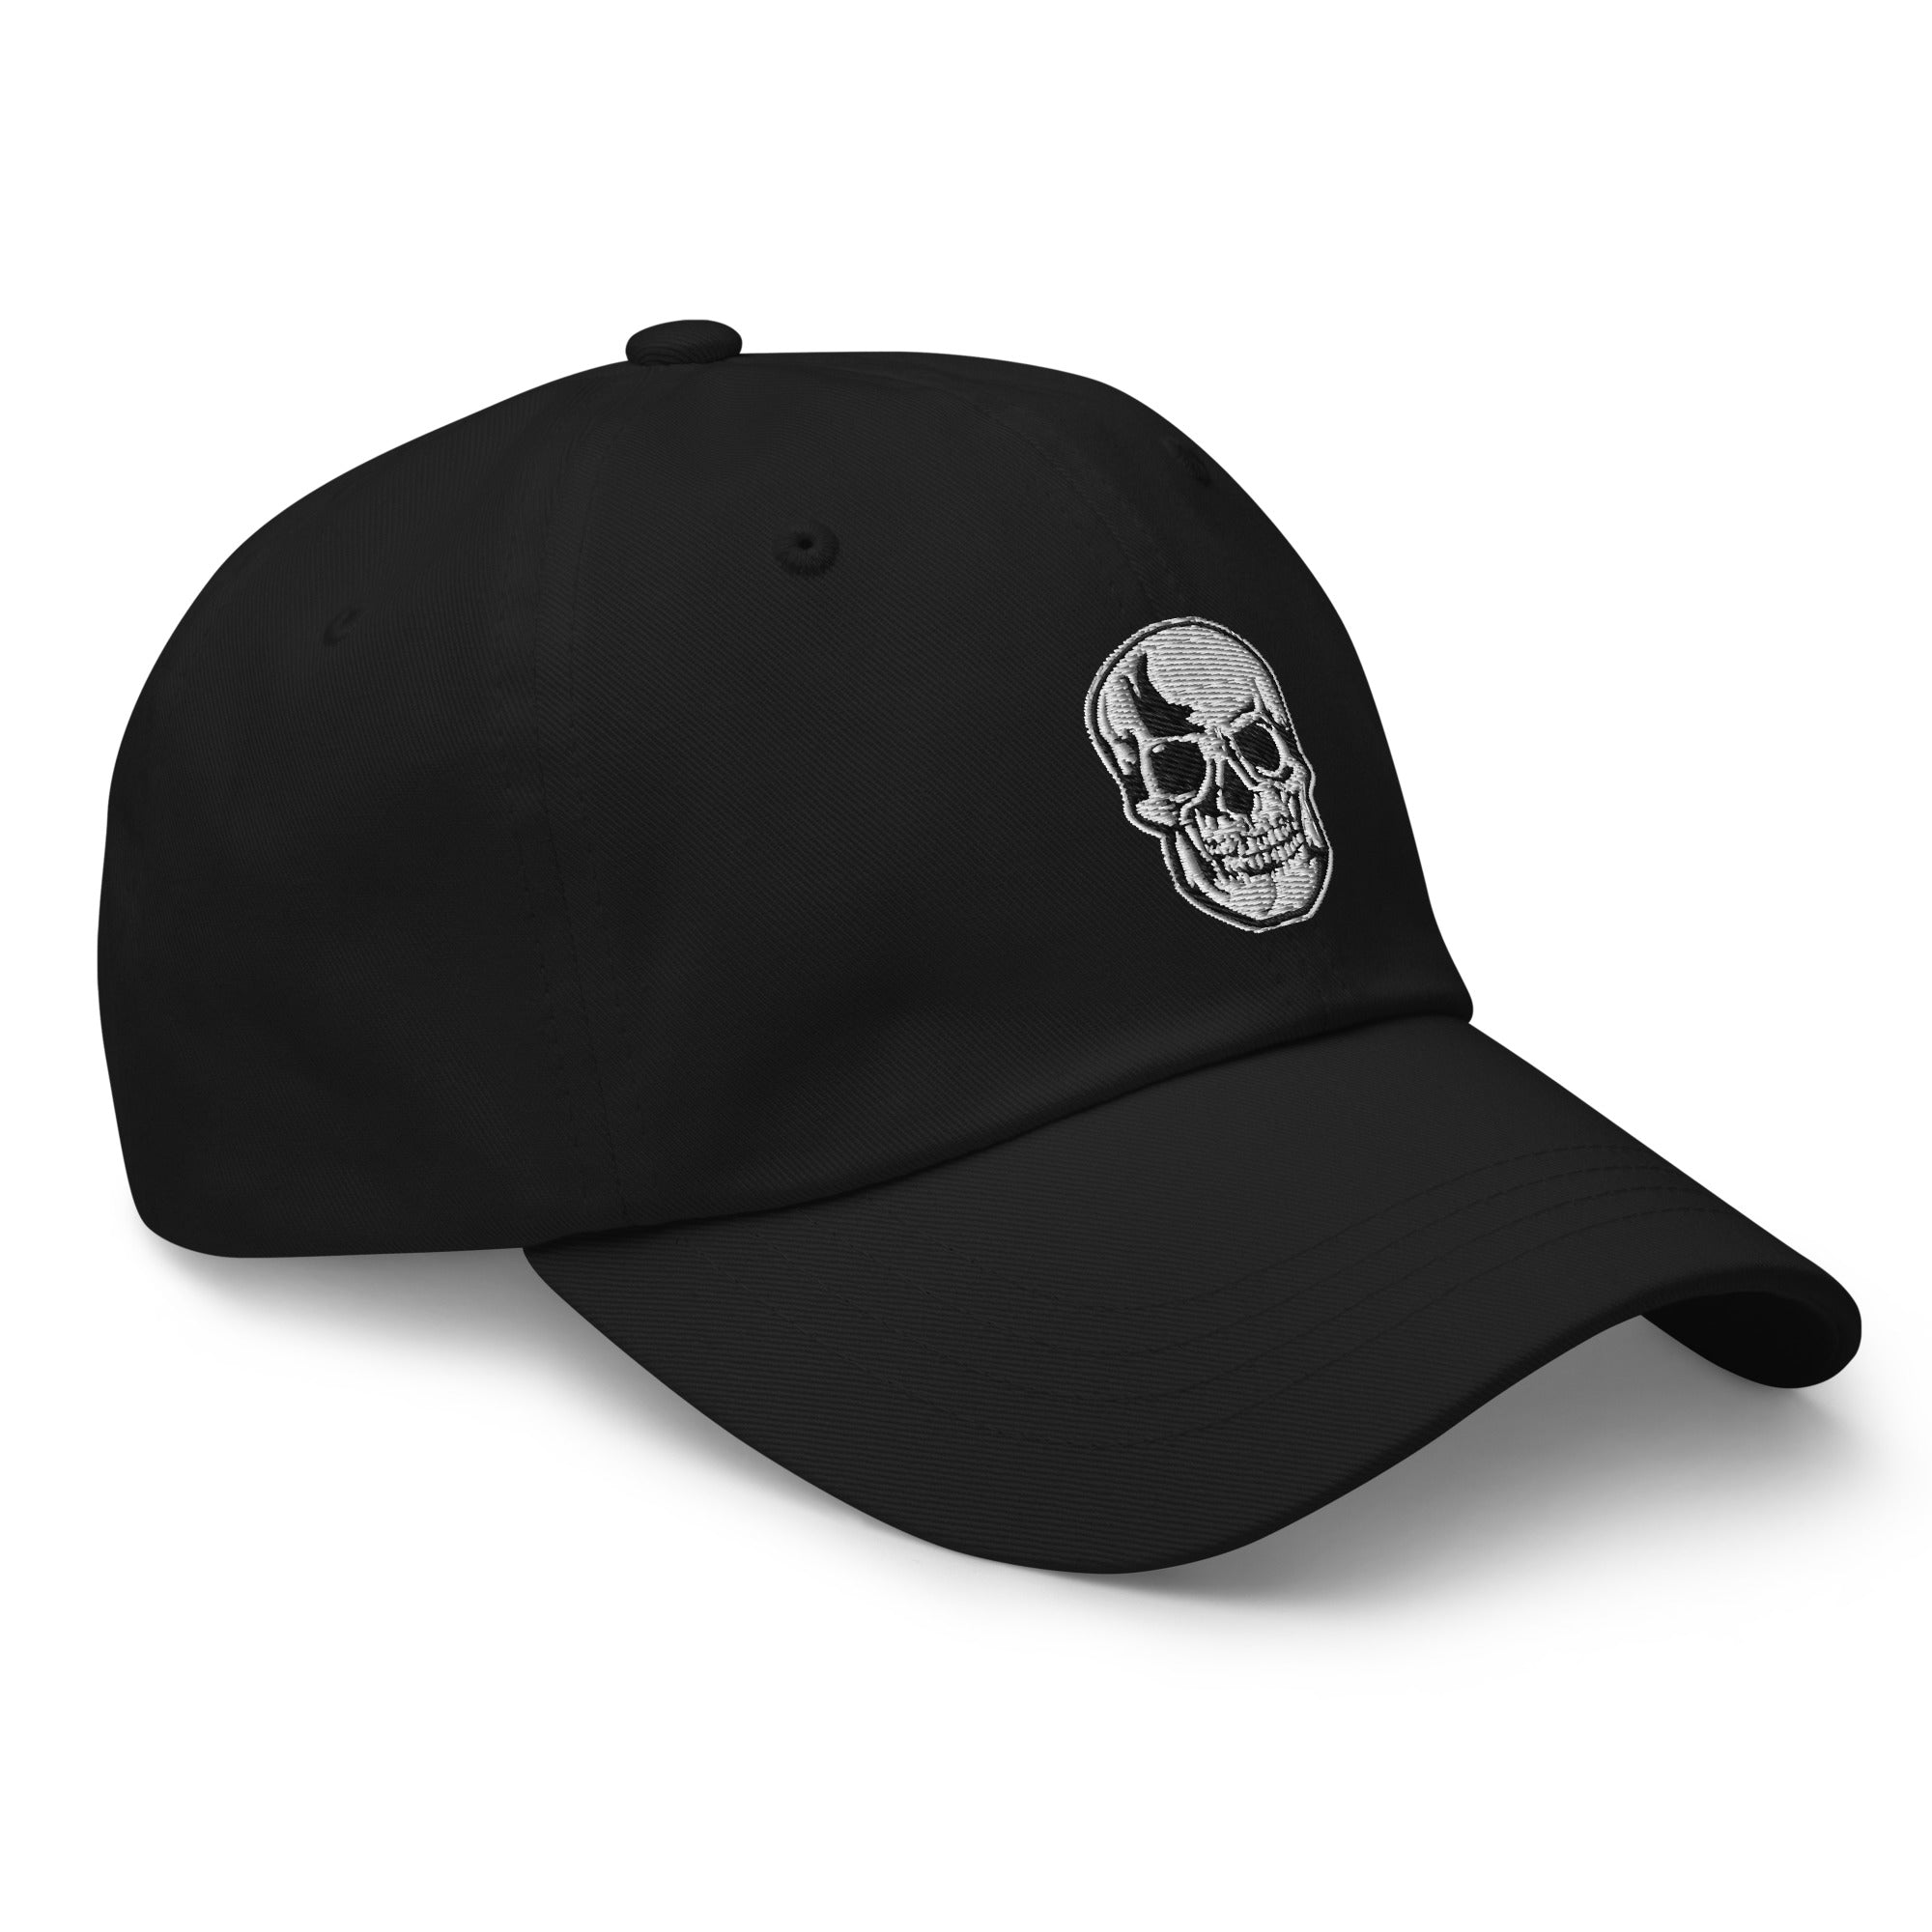 Death Skull Embroidered Baseball Cap Halloween Horror Style Dad hat - Edge of Life Designs